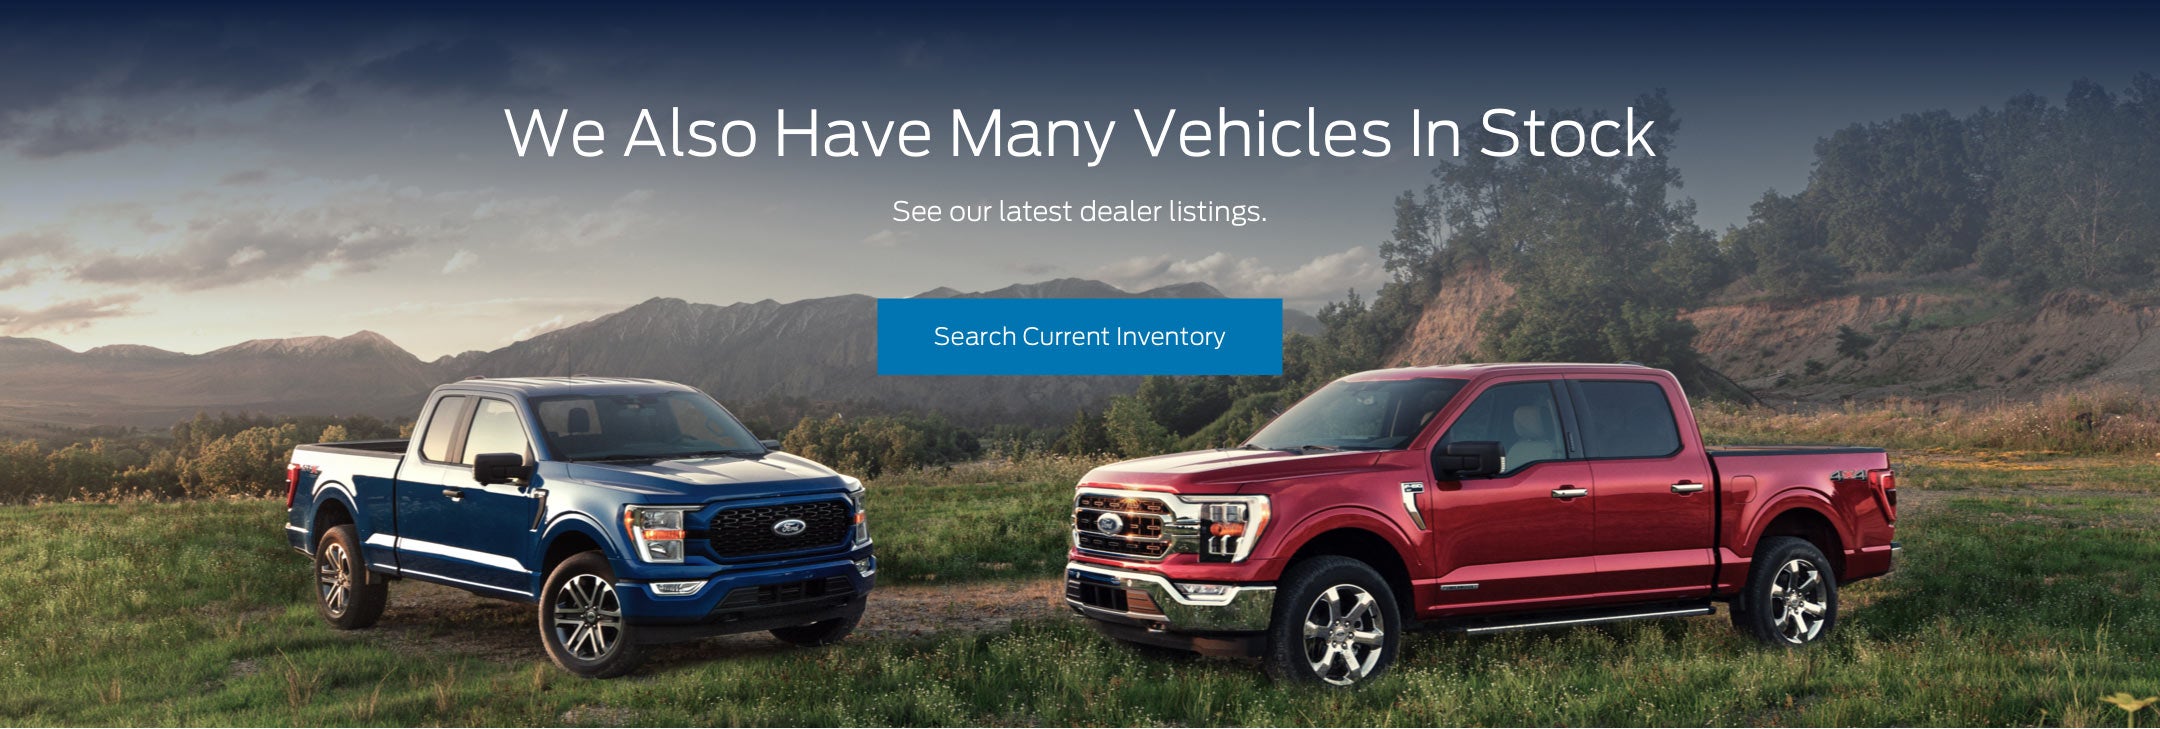 Ford vehicles in stock | Maguire's Ford Lincoln in Palmyra PA